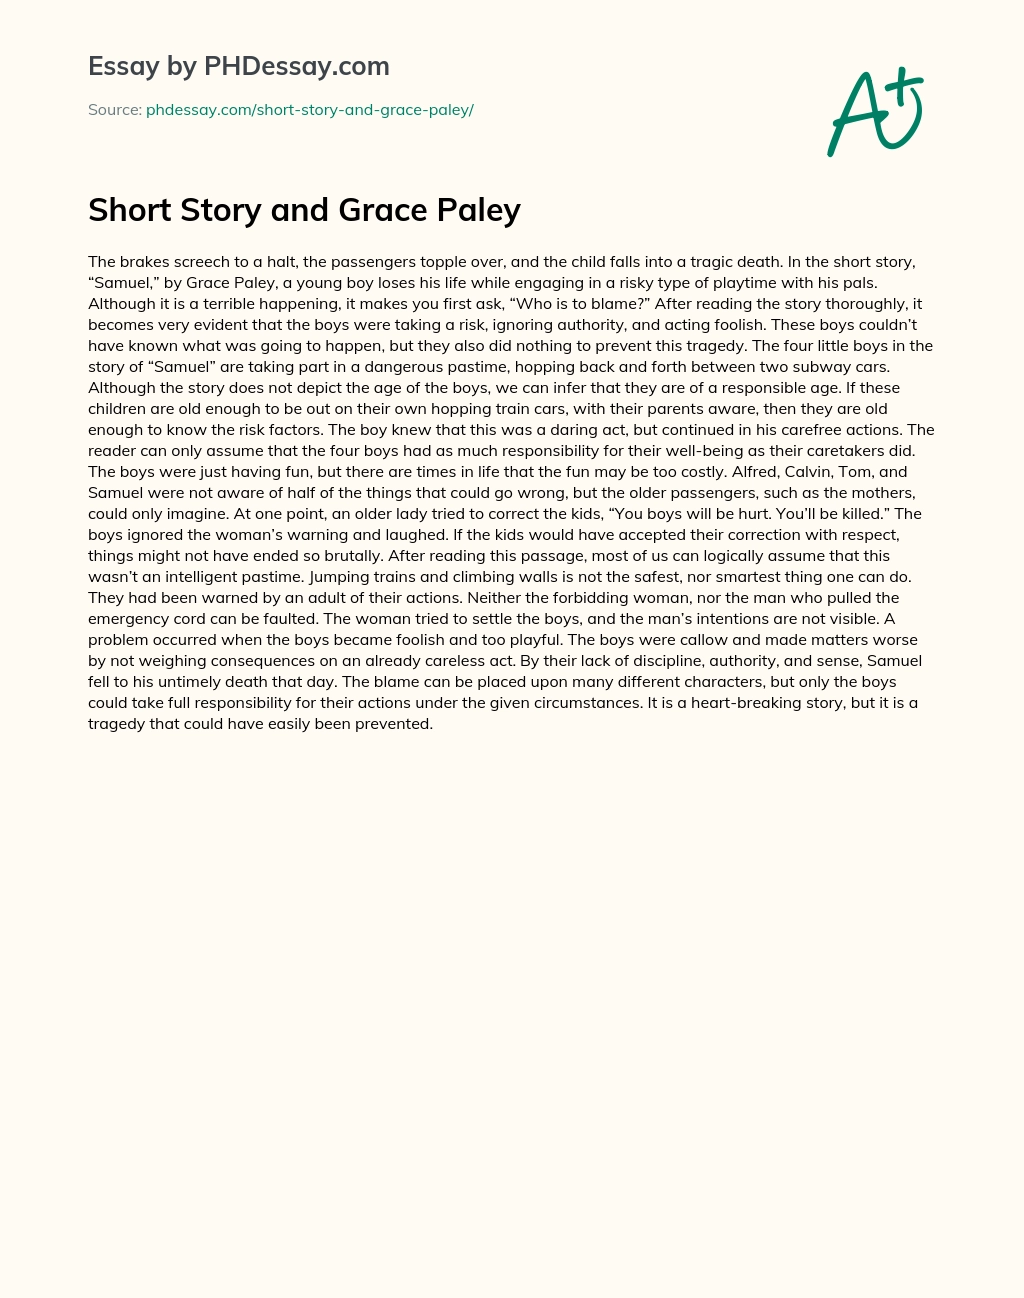 Short Story and Grace Paley essay